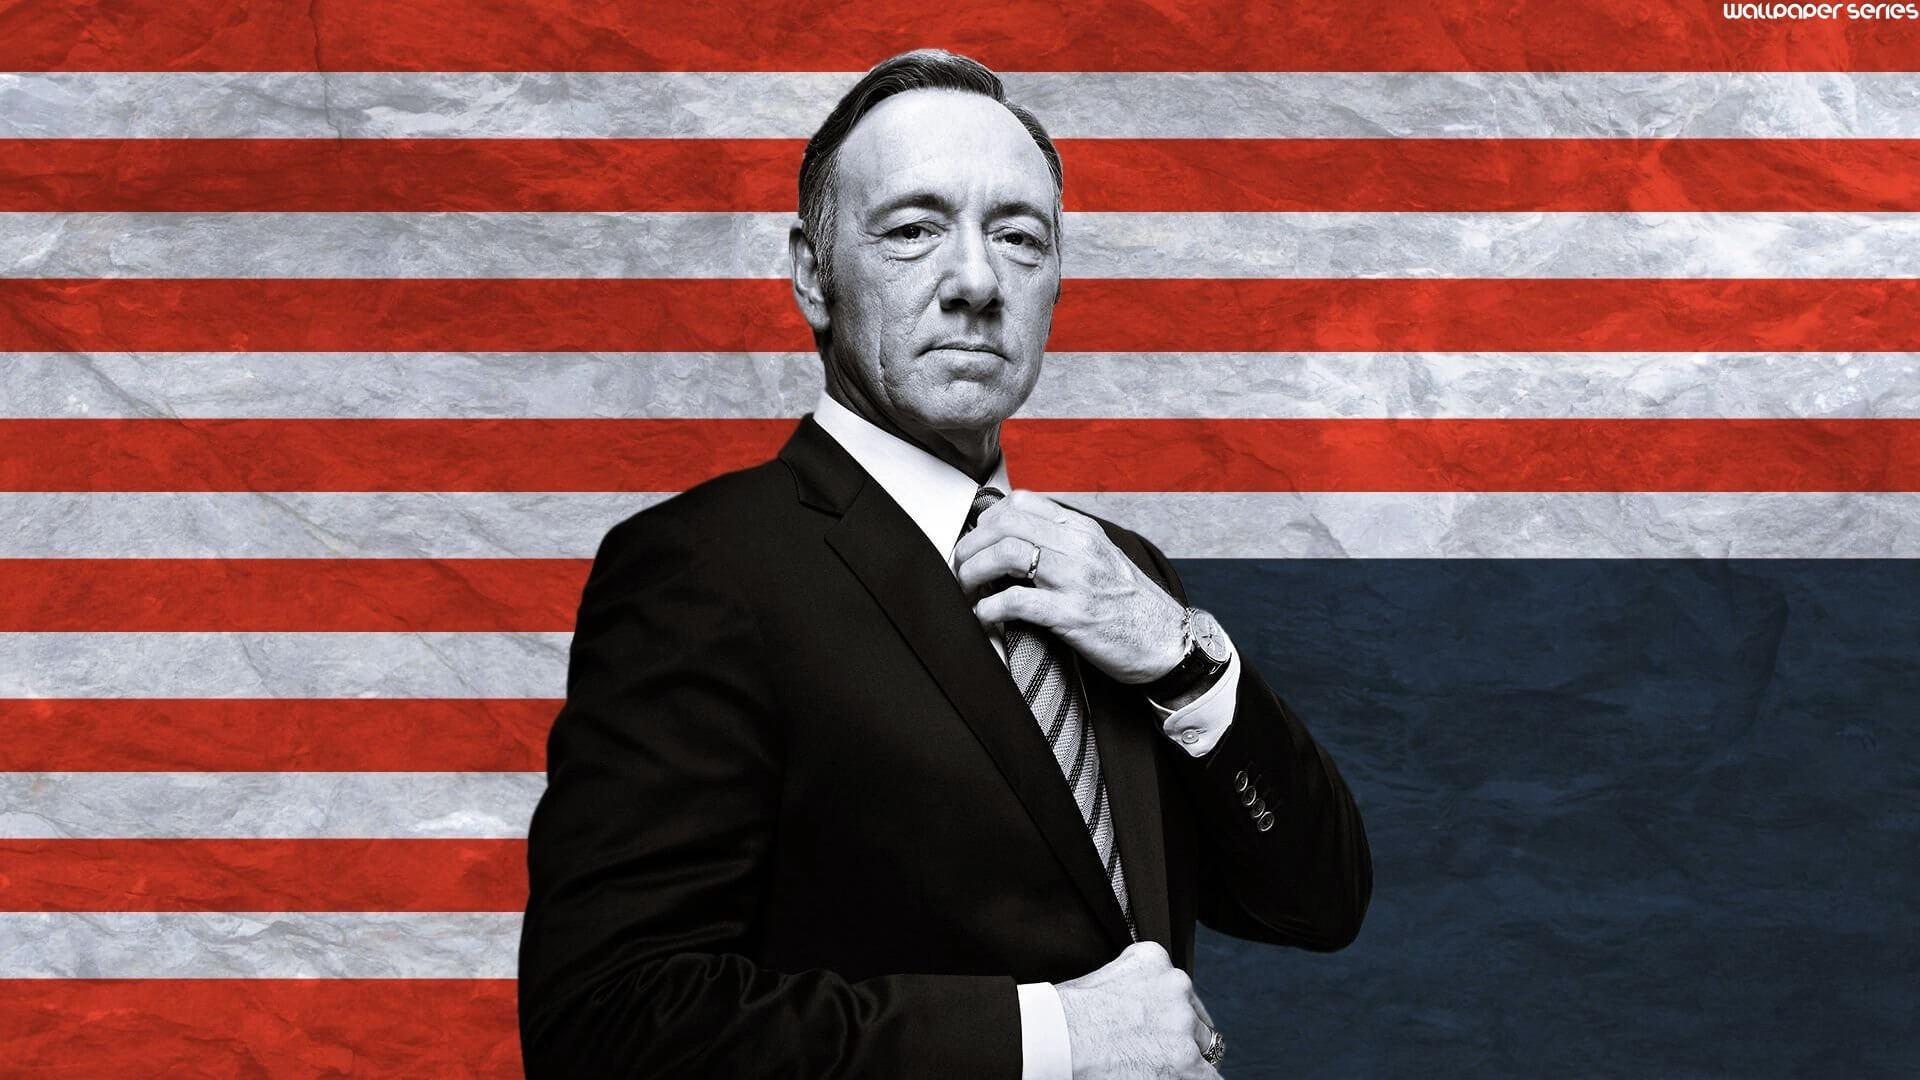 Netflix's 'House of Cards' Season 6 Open Casting Call